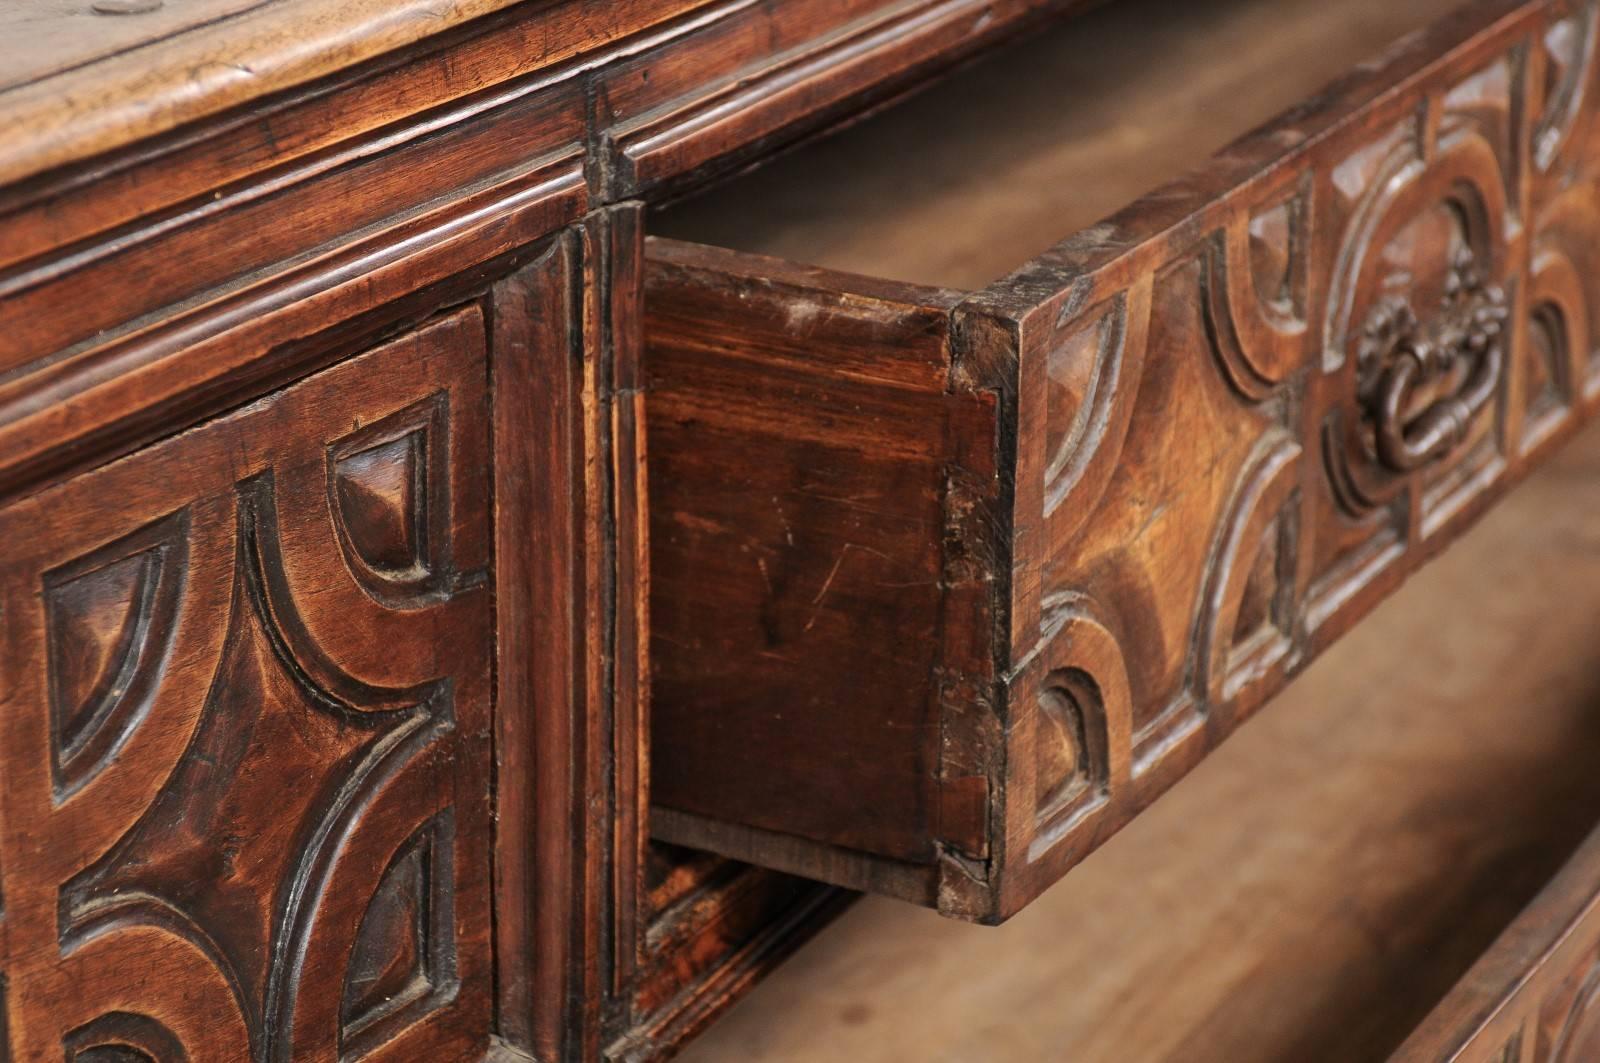 Exquisite 18th Century Spanish Sacristy Chest with Carved Wood Detailed Pattern 2